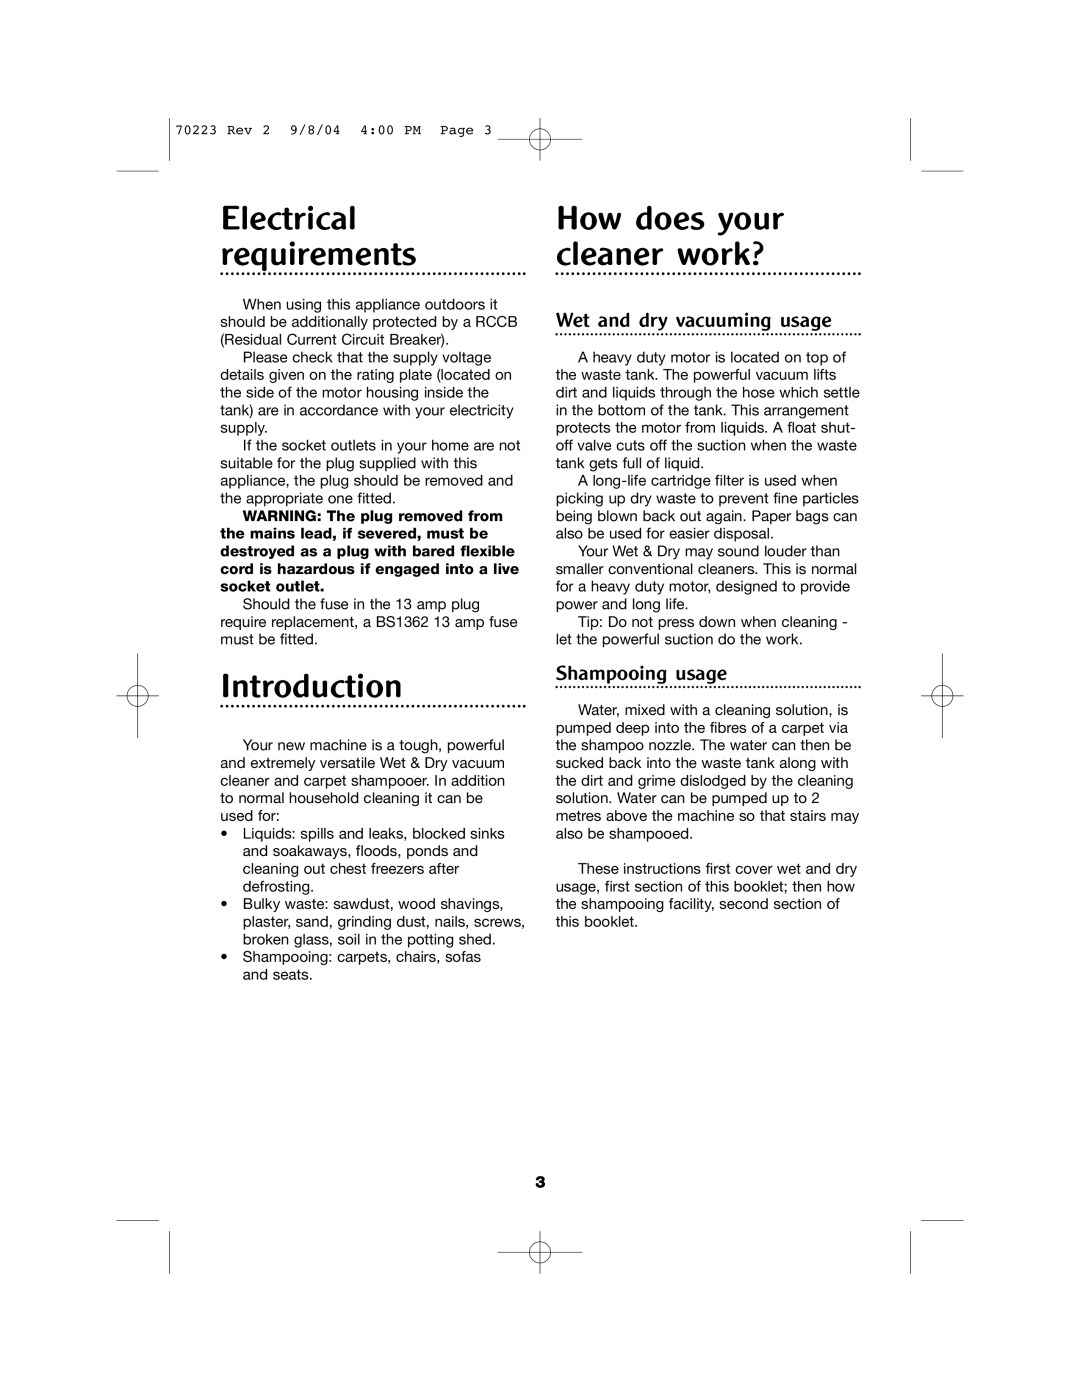 Morphy Richards Carpet Cleaner manual Electrical requirements, How does your cleaner work?, Introduction, Shampooing usage 